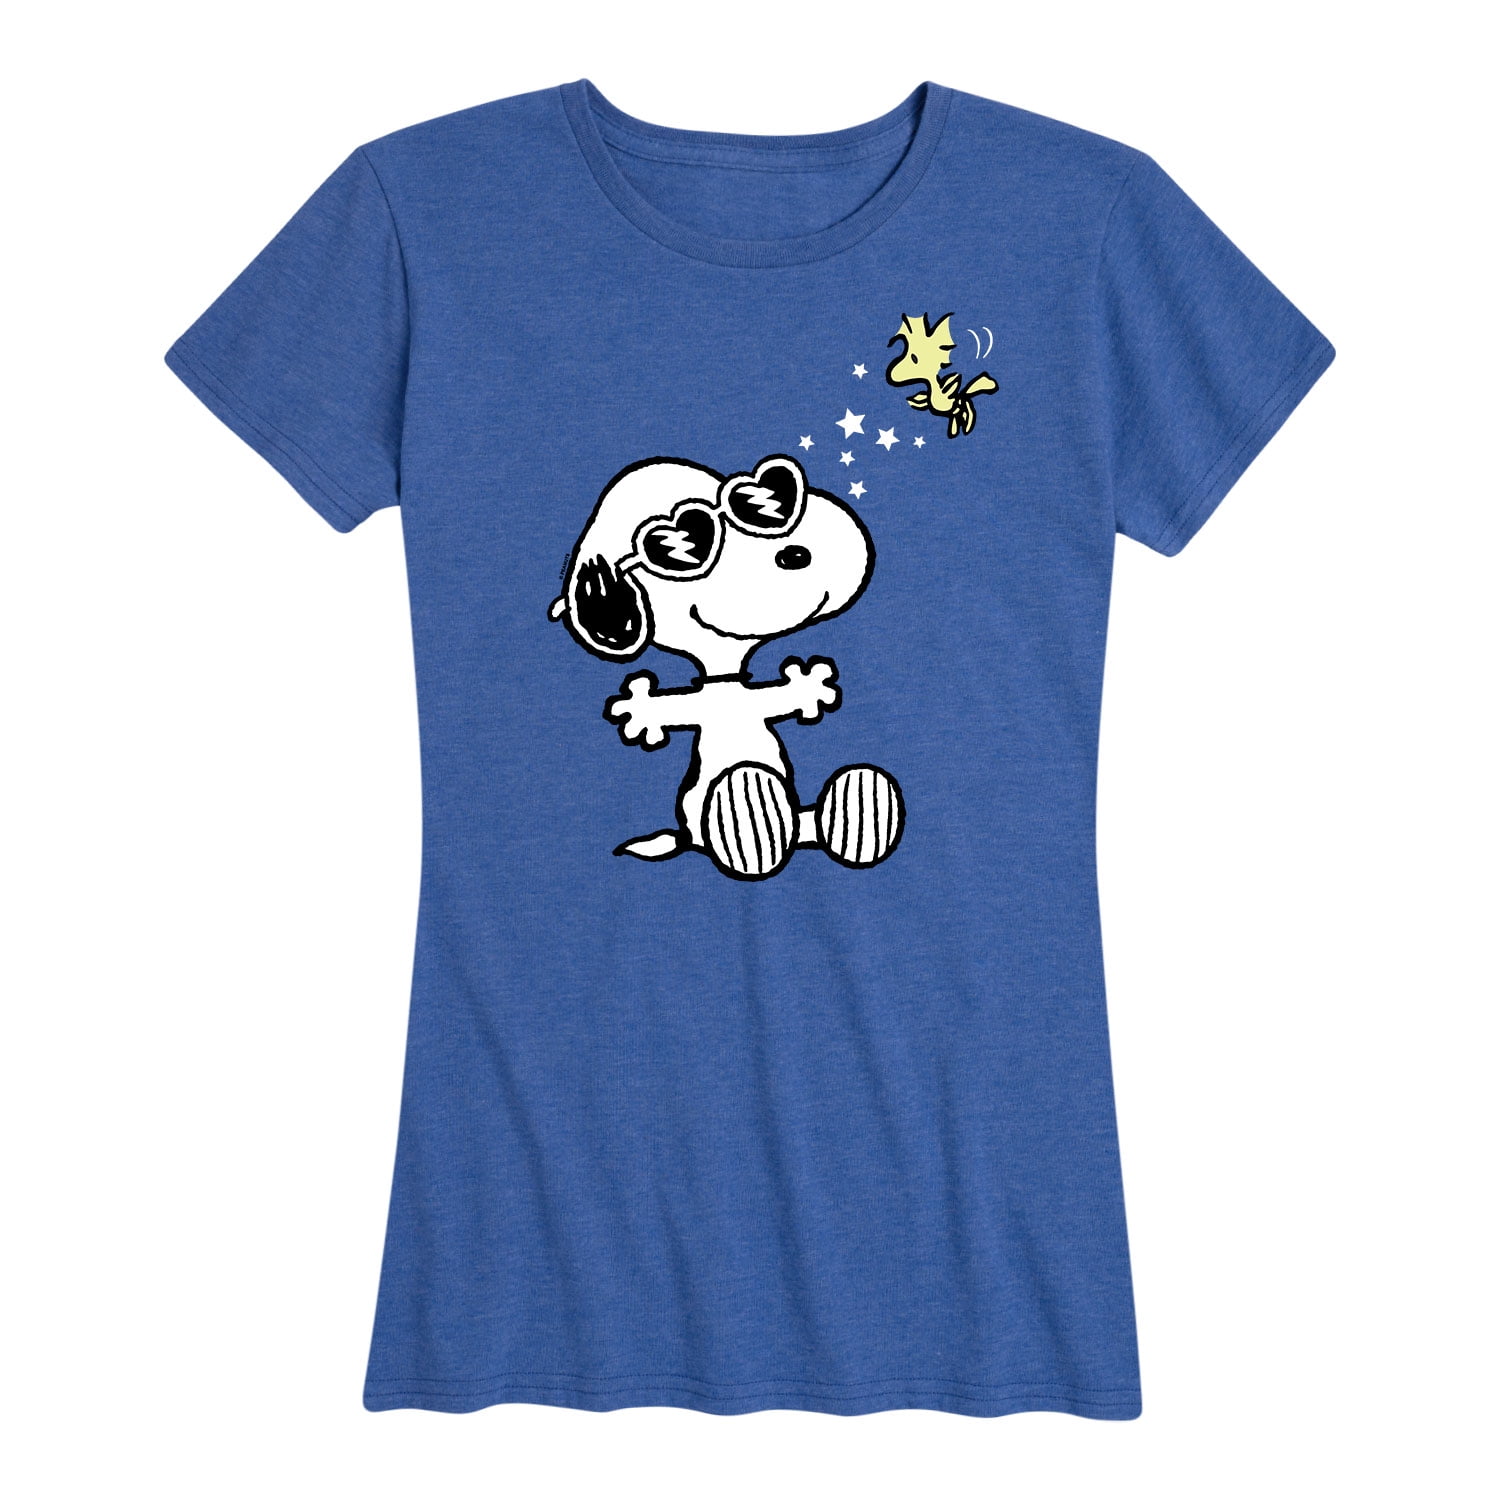 Peanuts - Faces of Snoopy - Women\'s Short Sleeve Graphic T-Shirt | T-Shirts